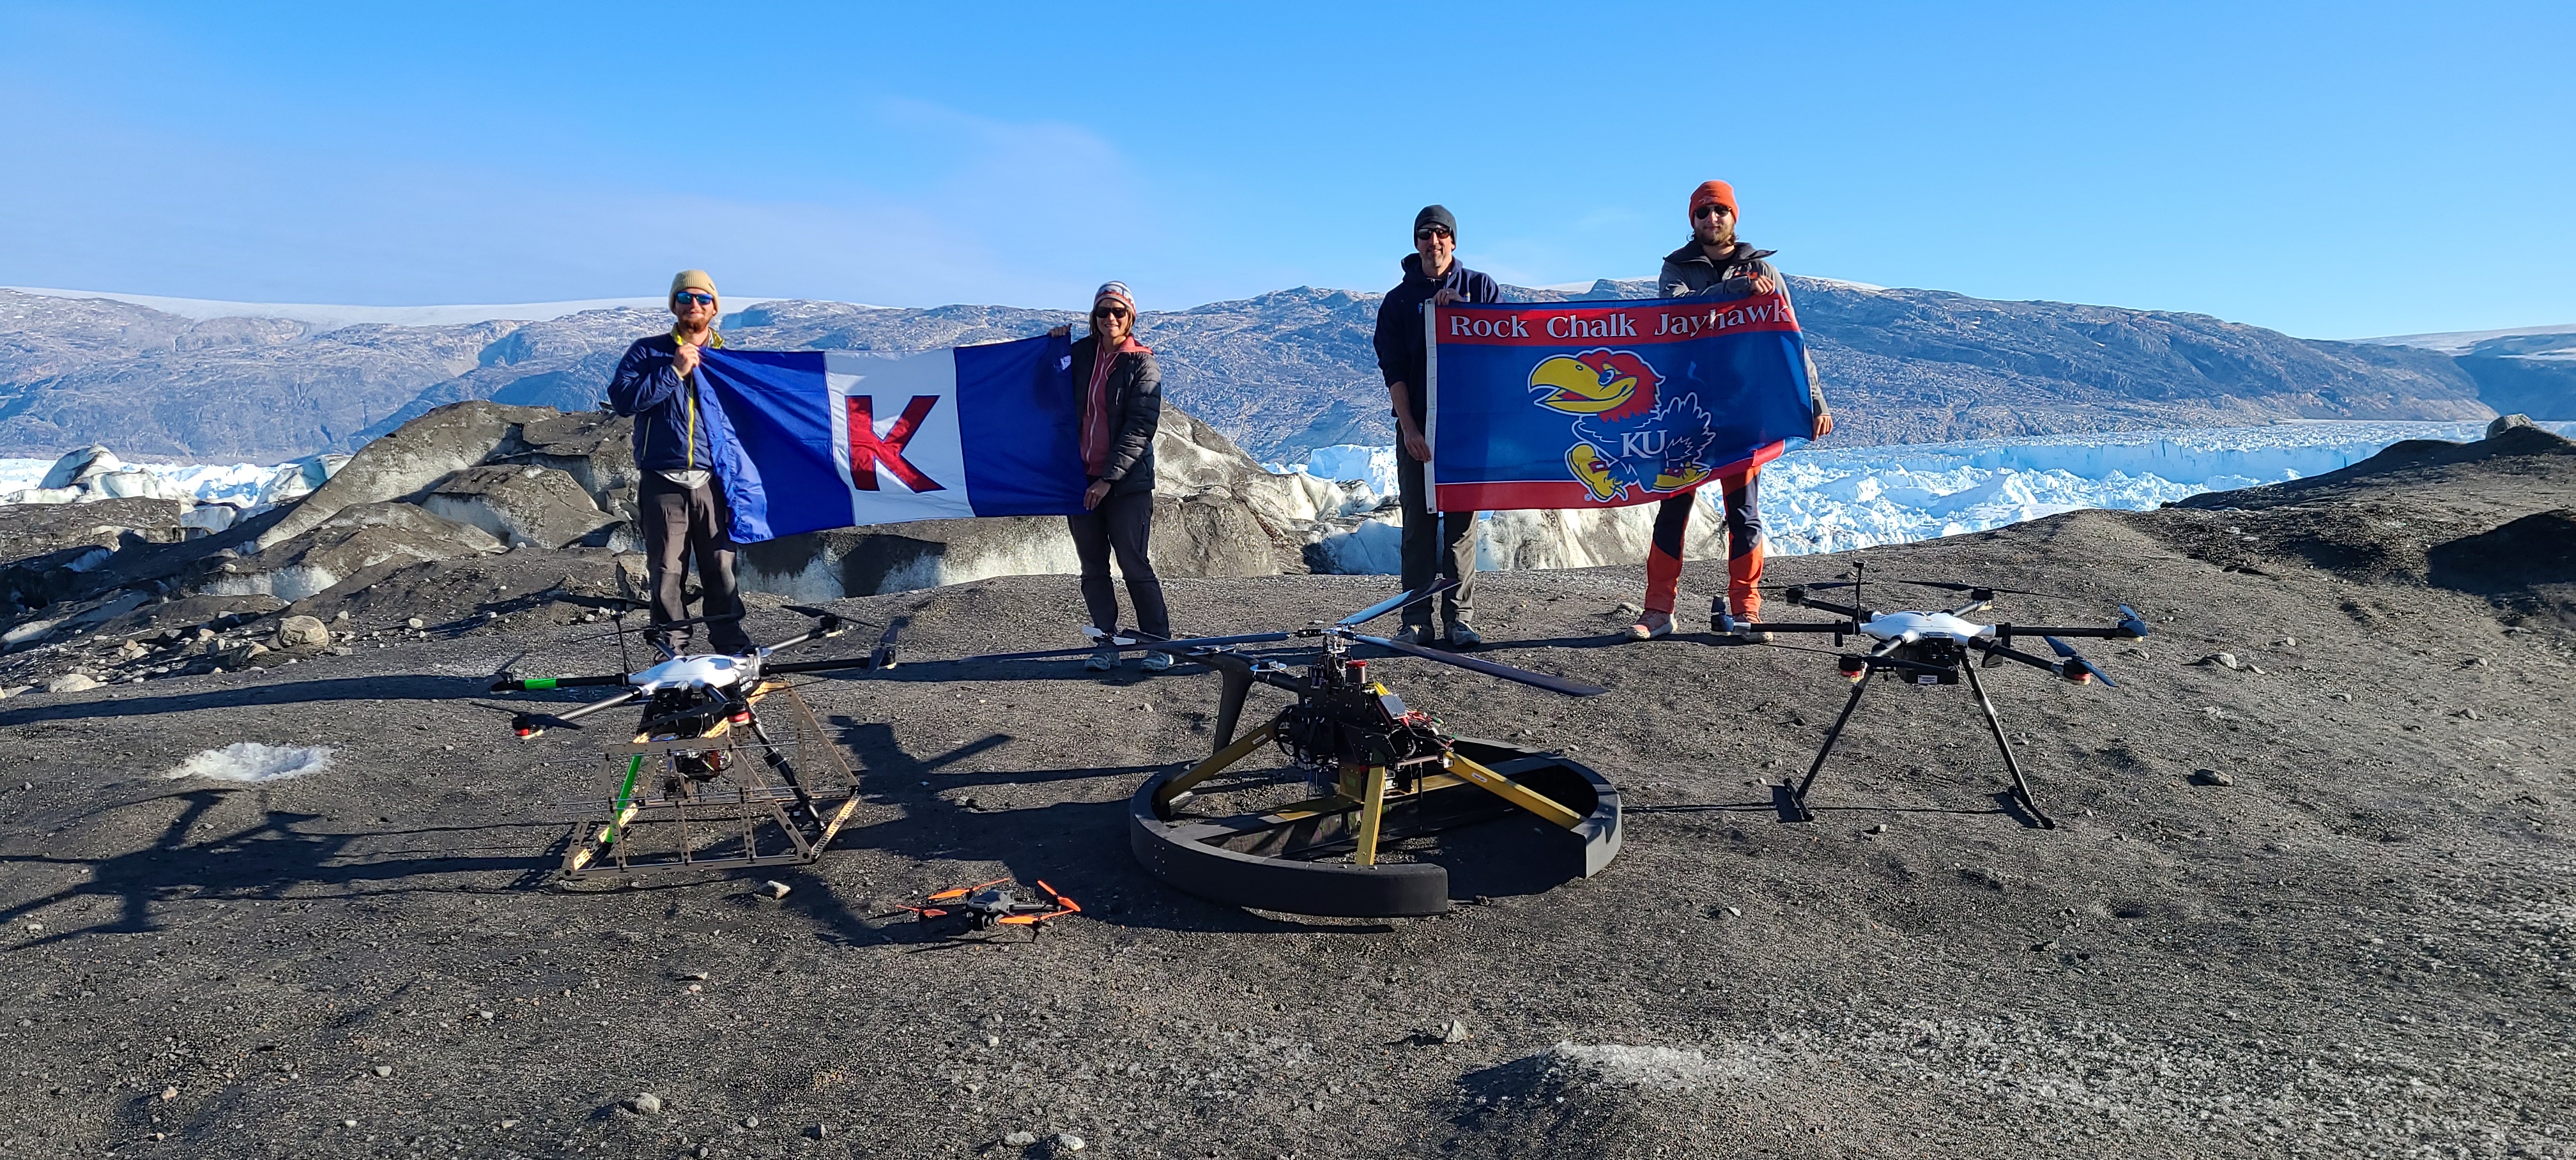 "Emily Arnold and colleagues pose near a scientific drone while holding KU flags."